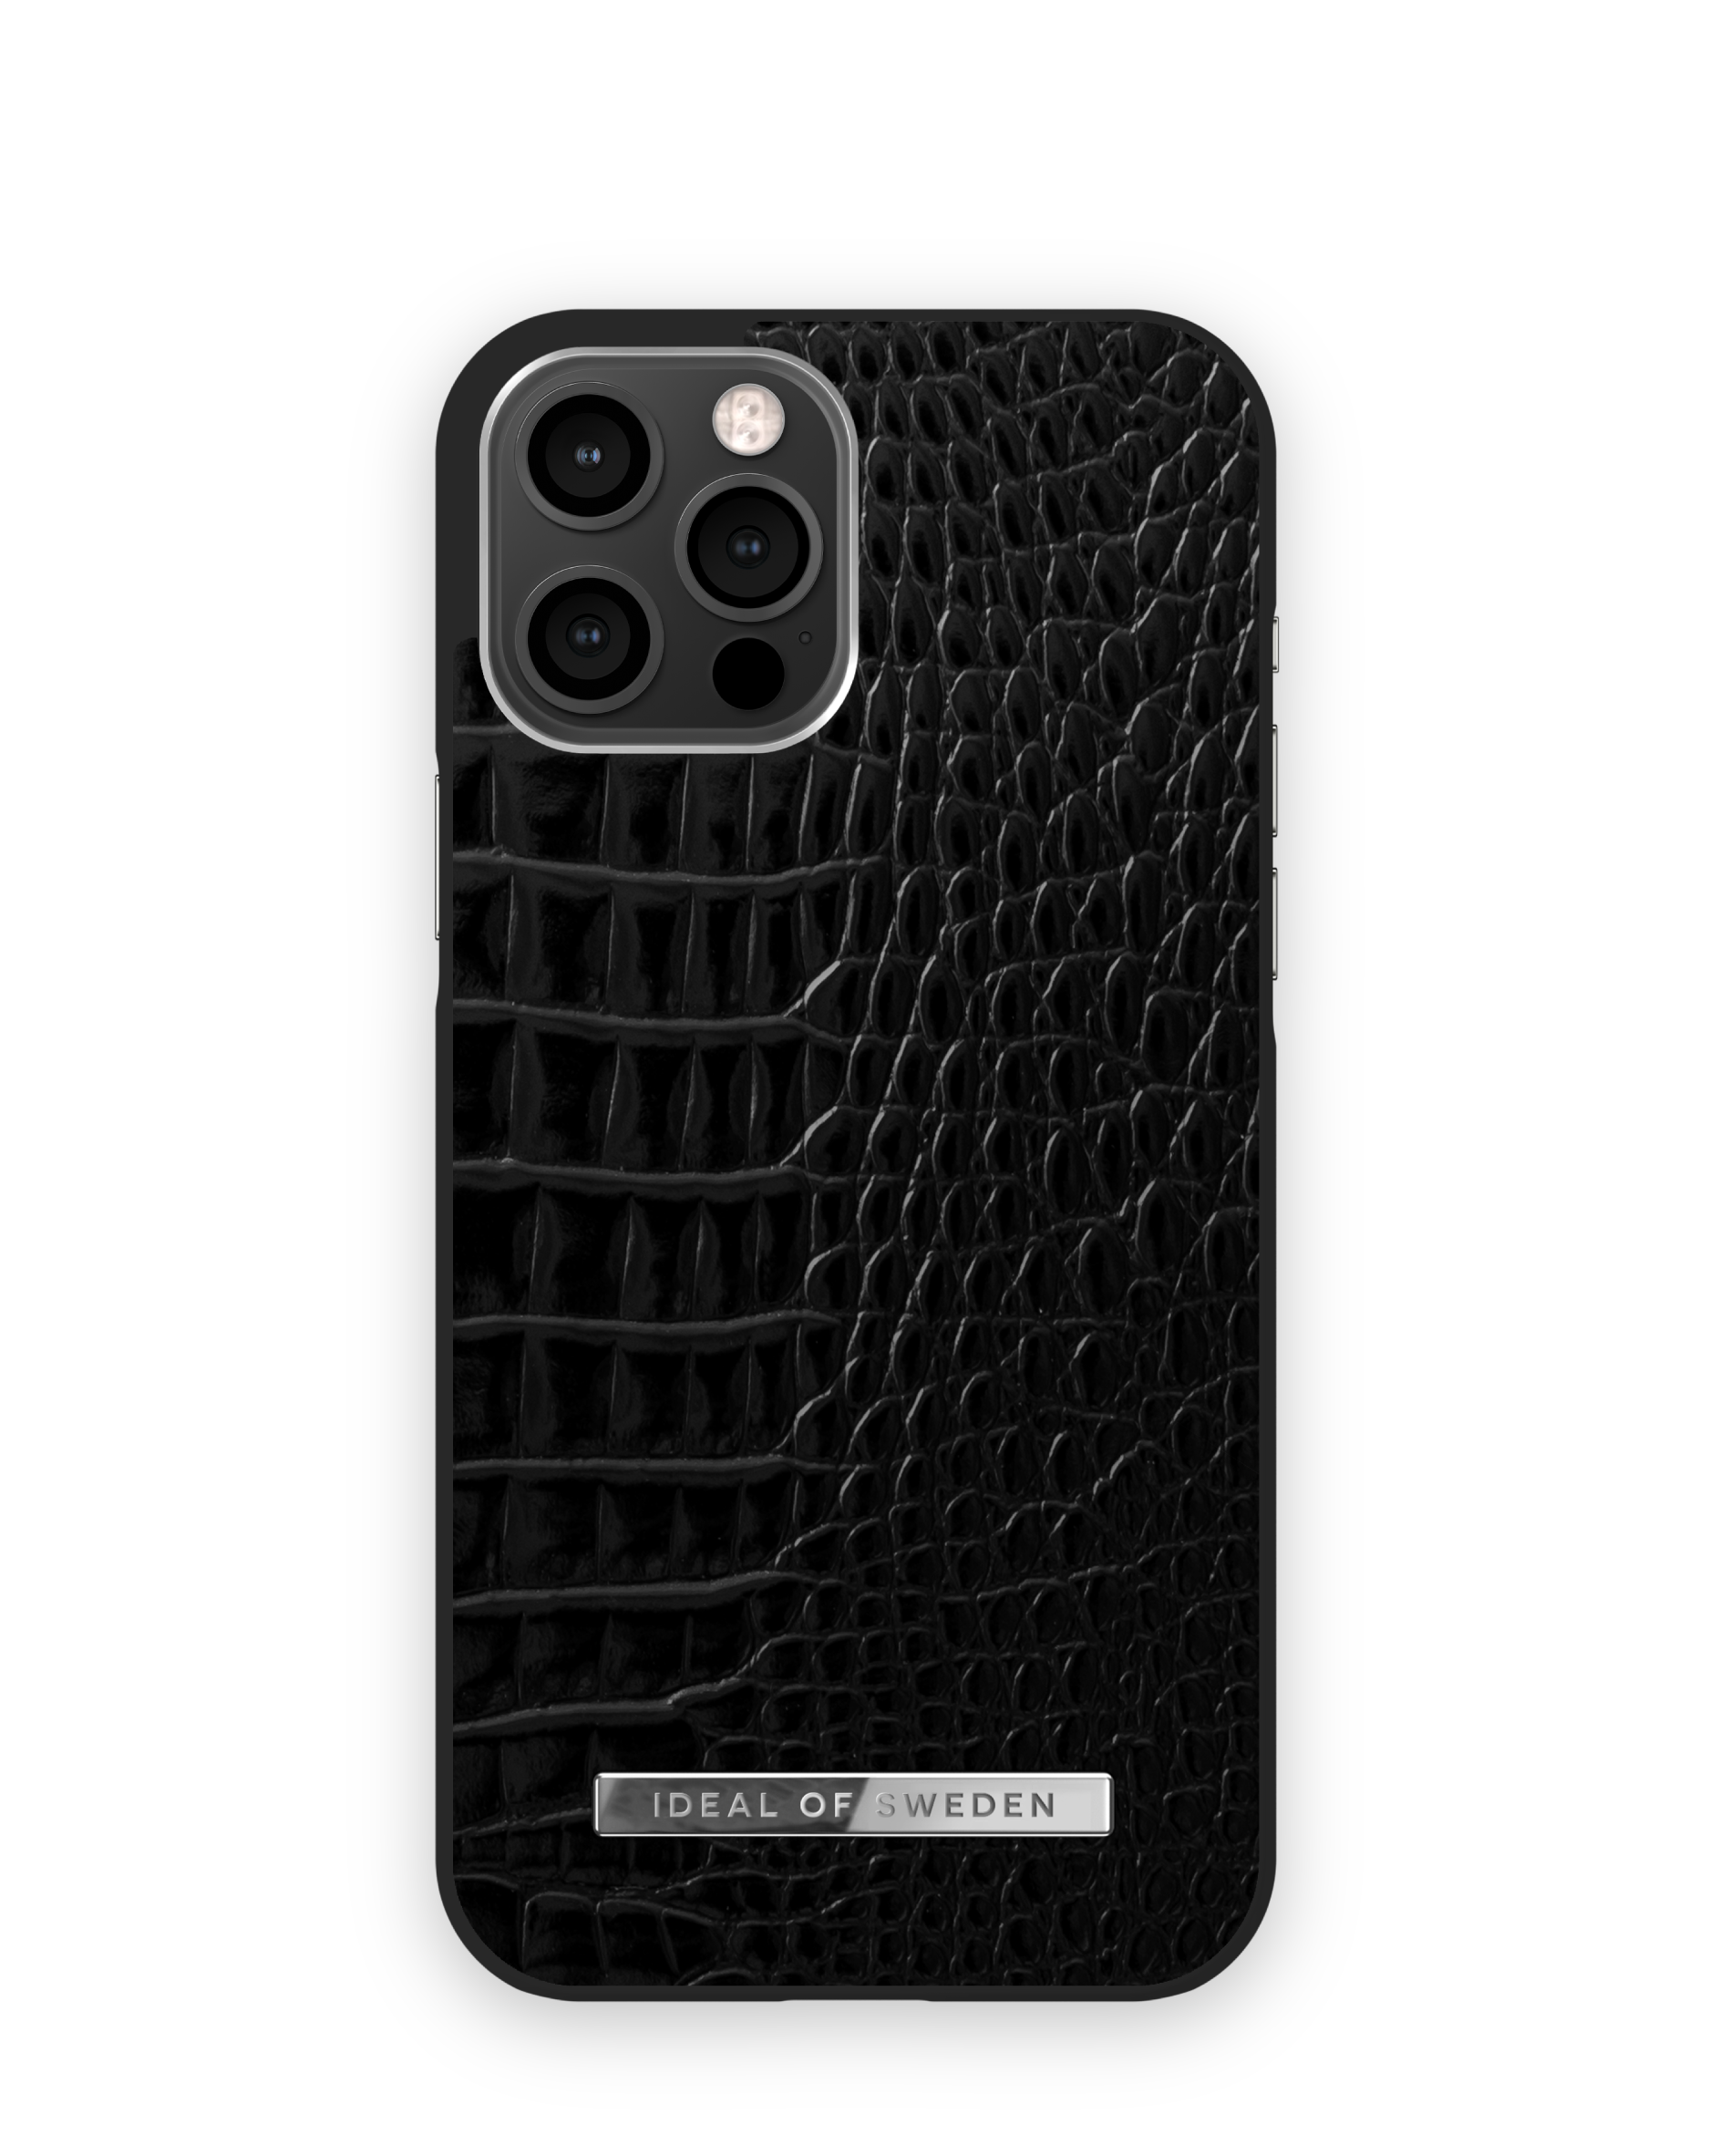 IDEAL OF SWEDEN IDACSS21-I2067, Backcover, Max, Noir 12 Neo Silver Pro Croco Apple, IPhone